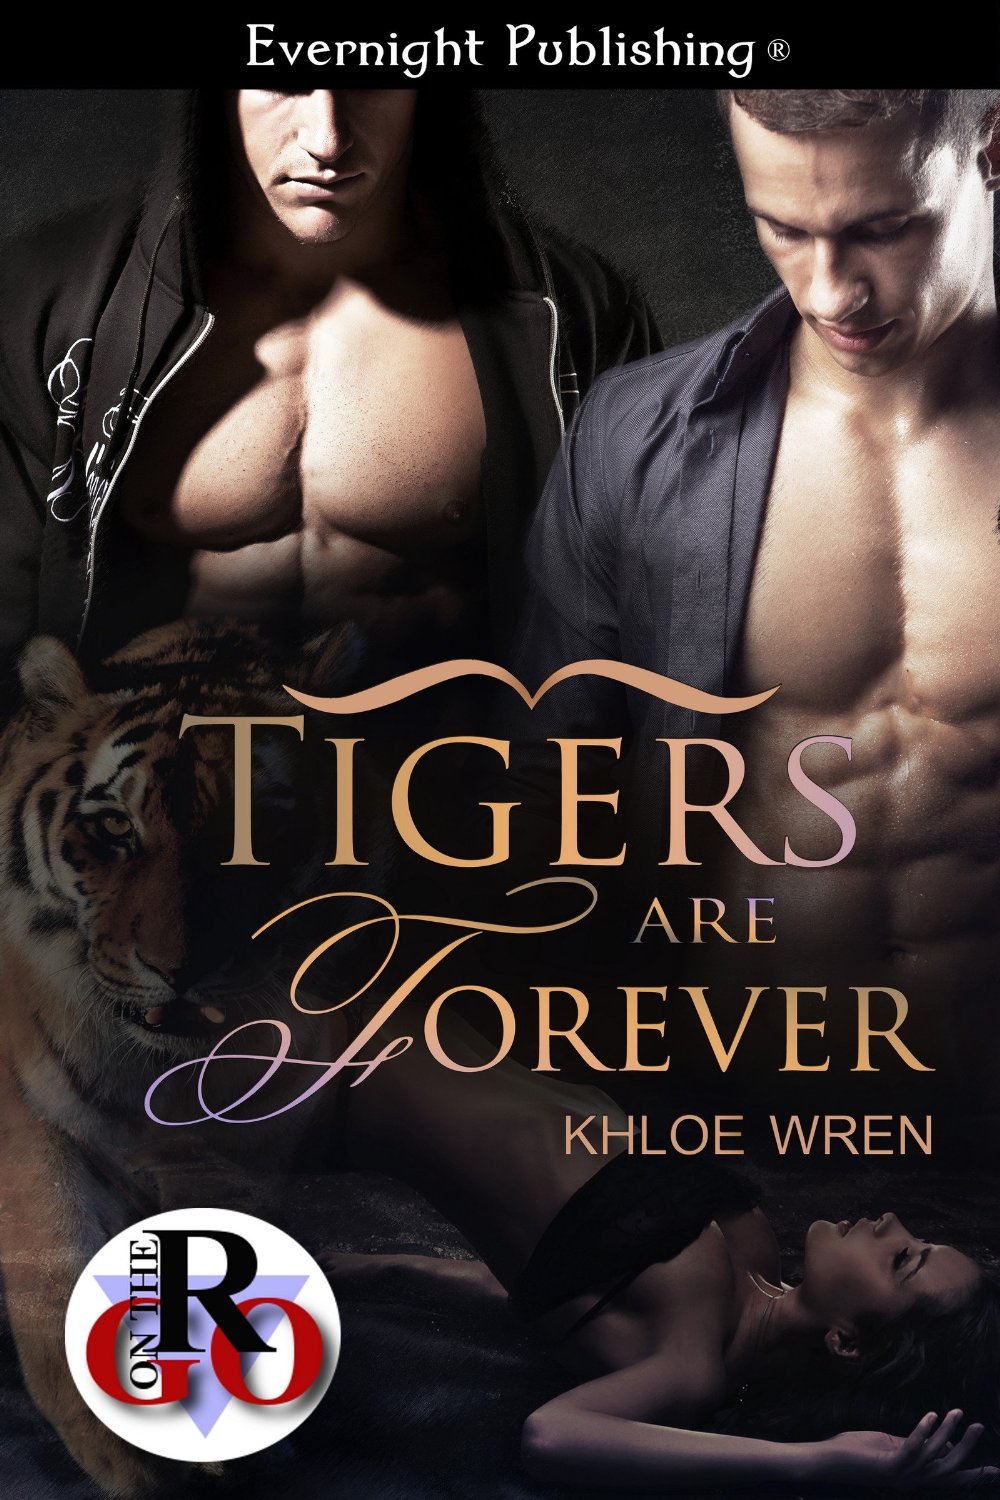 Tigers are Forever by Khloe Wren